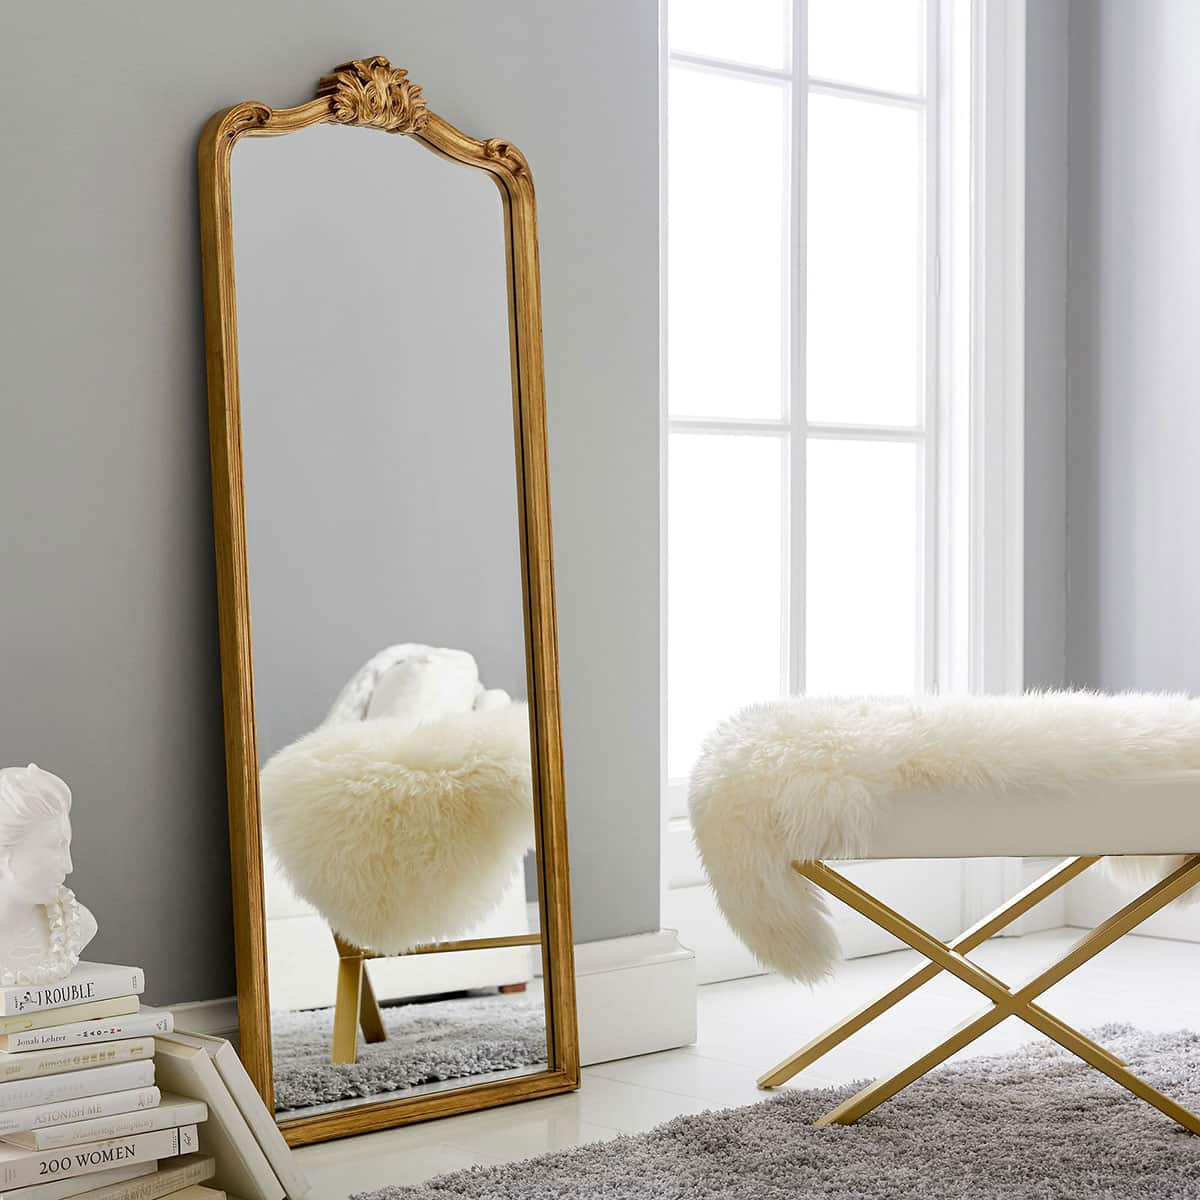 Elevate your home decor game with these Anthropologie mirror dupes. These affordable alternatives will make any room look like it's straight out of a magazine.